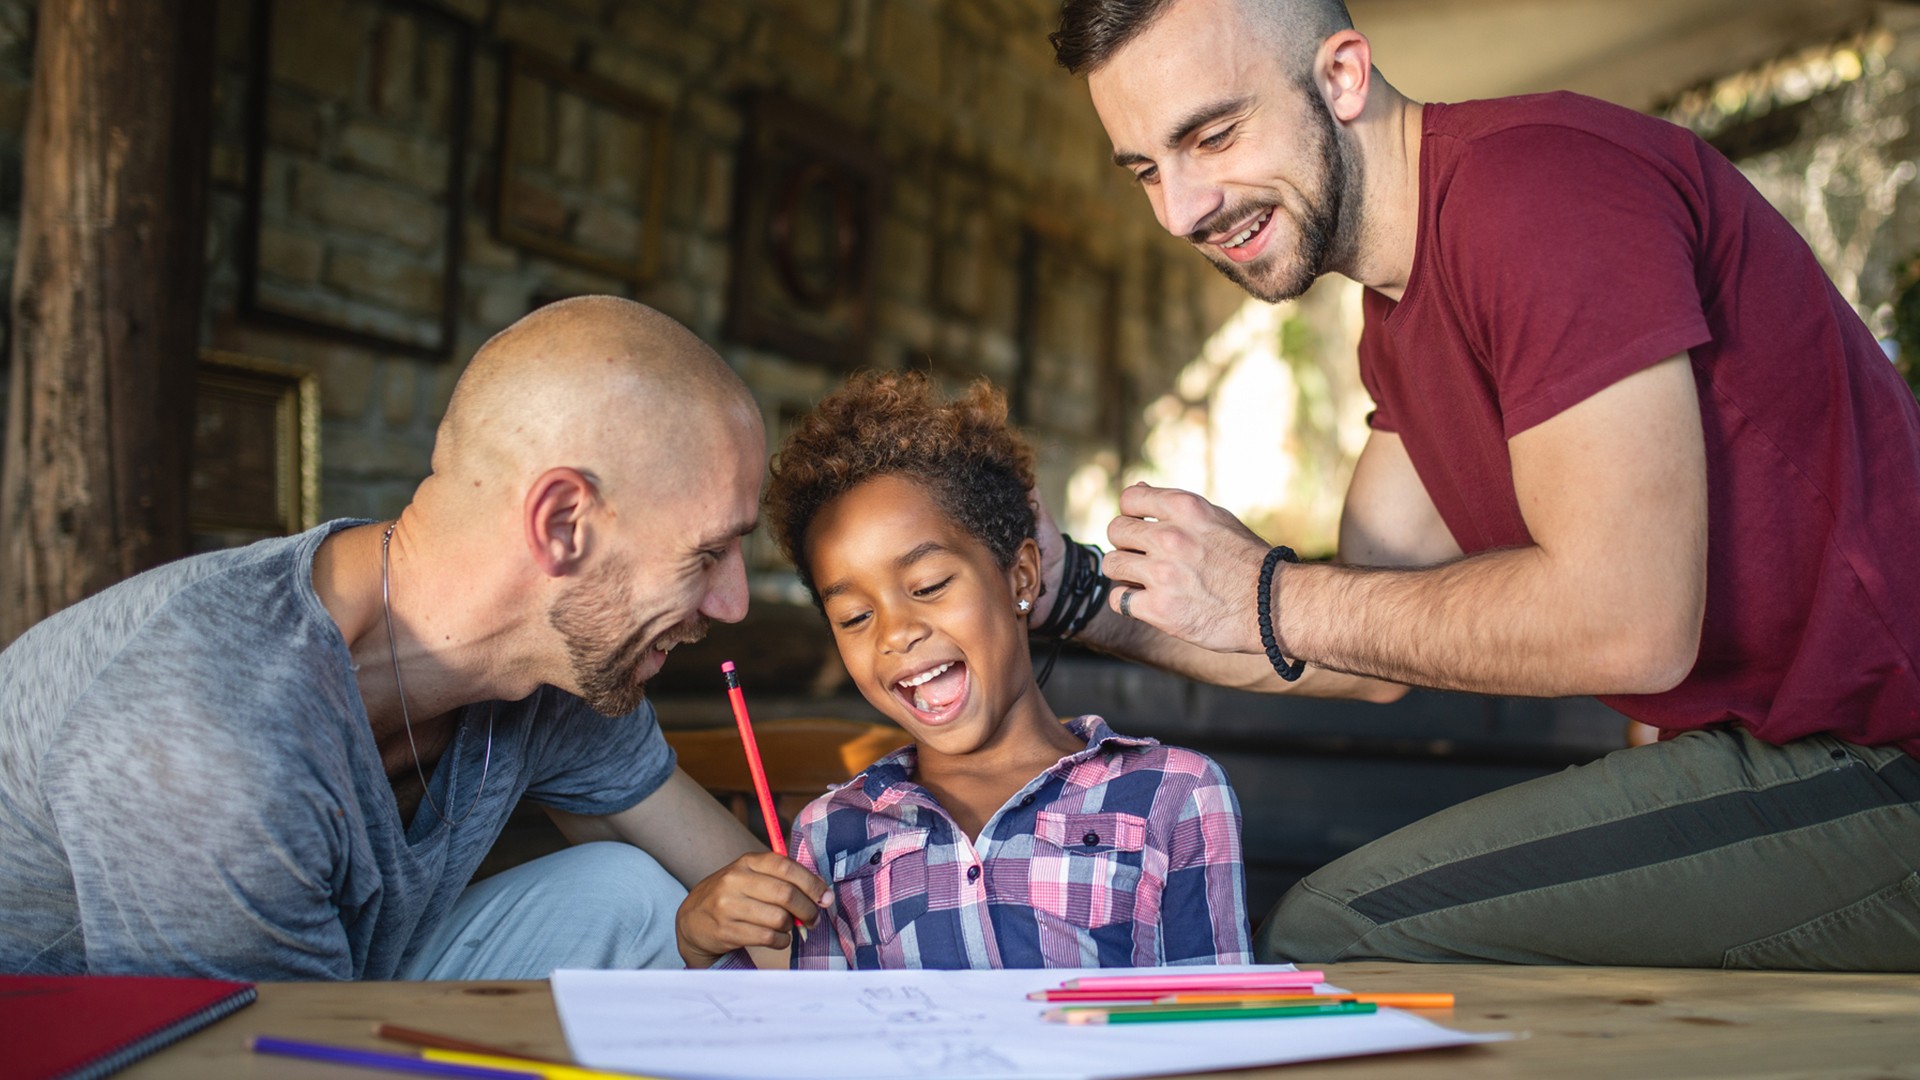 Two fathers and a young girl who is laughing work on completing a homework assignment at the table. 